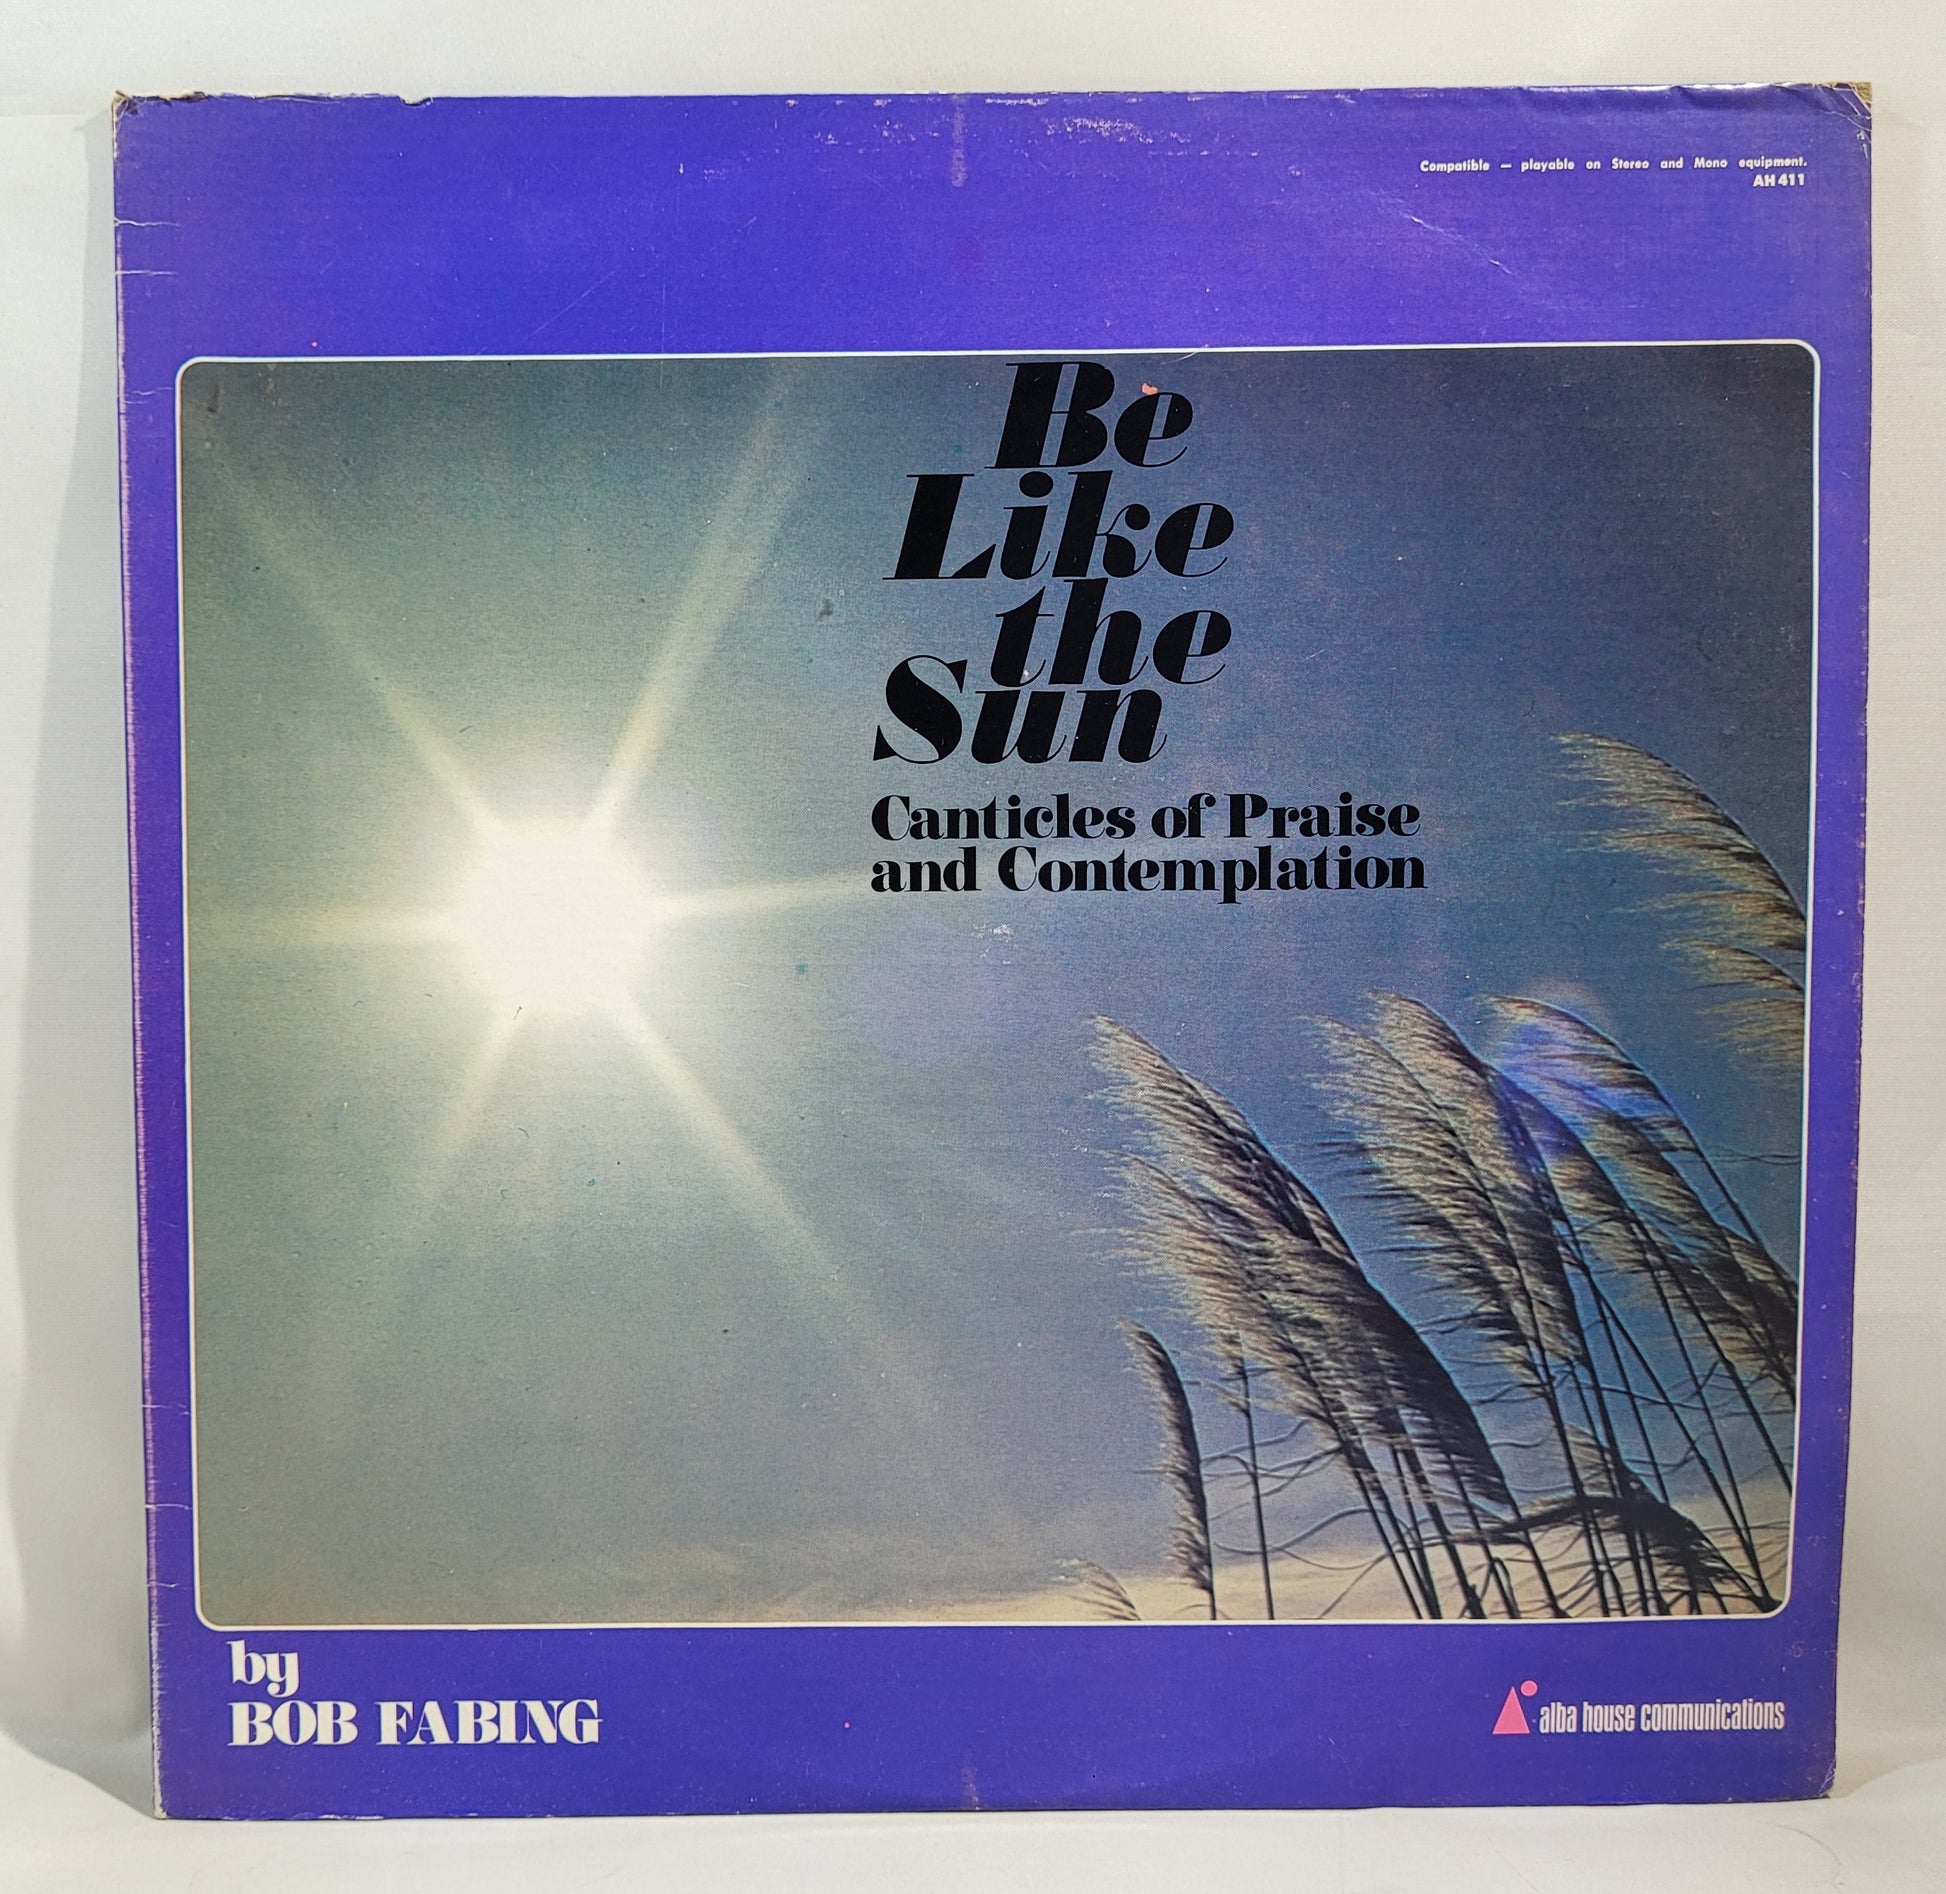 Bob Fabing - Be Like the Sun Canticles of Praise and Contemplation [1974 Used Vinyl Record LP]